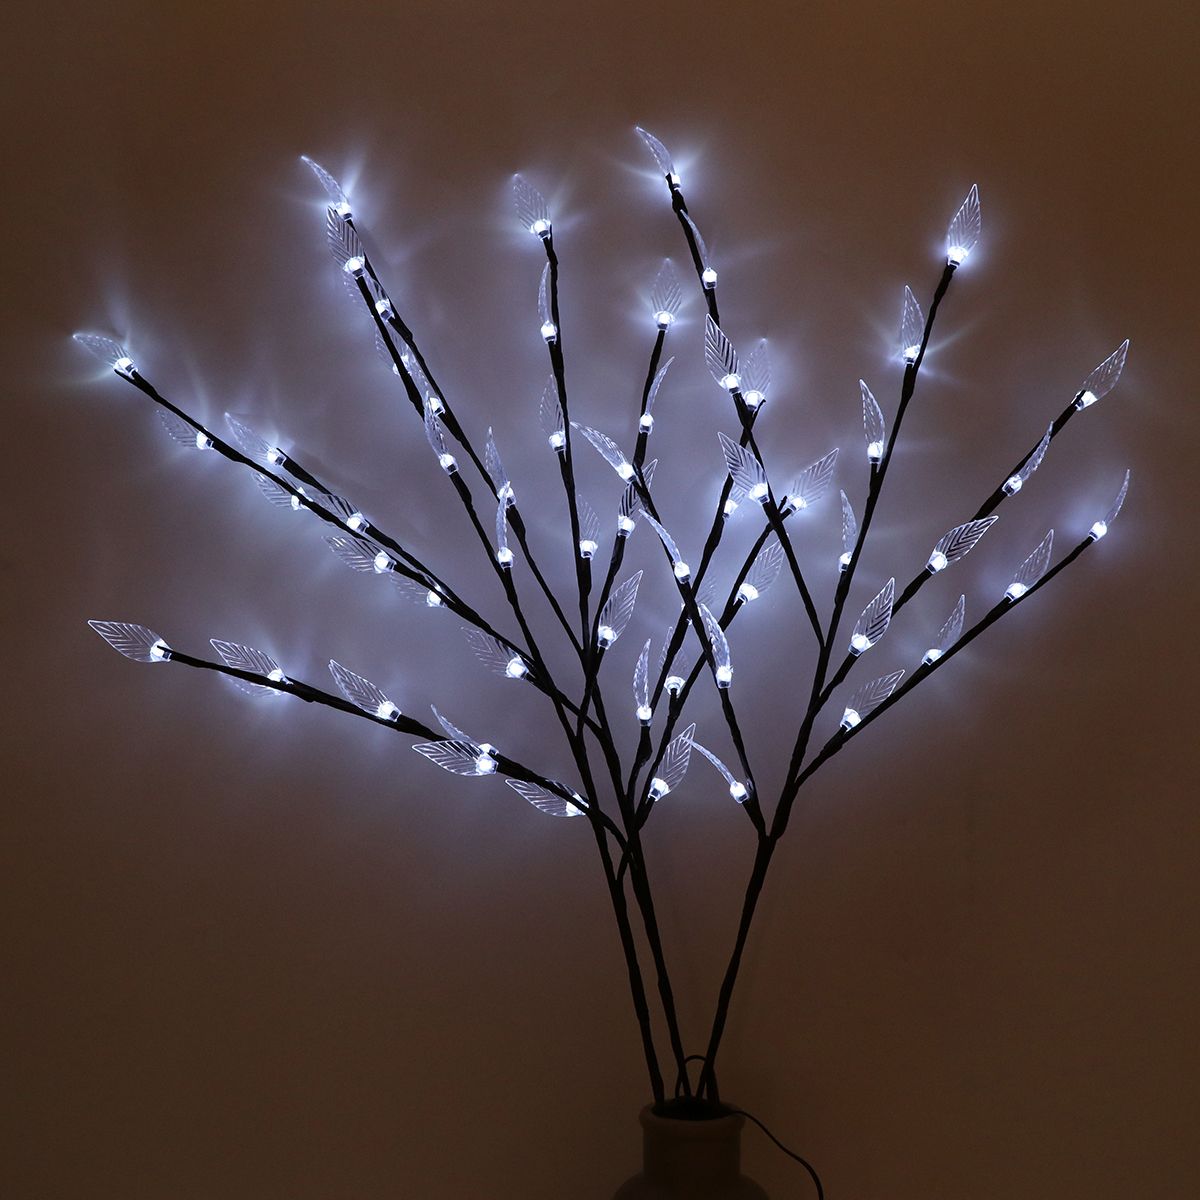 3PCS-LED-Solar-Powered-Lawn-Light-Tree-Branches-Ground-Lamp-Outdoor-Garden-Yard-Lighting-Decoration-1735081